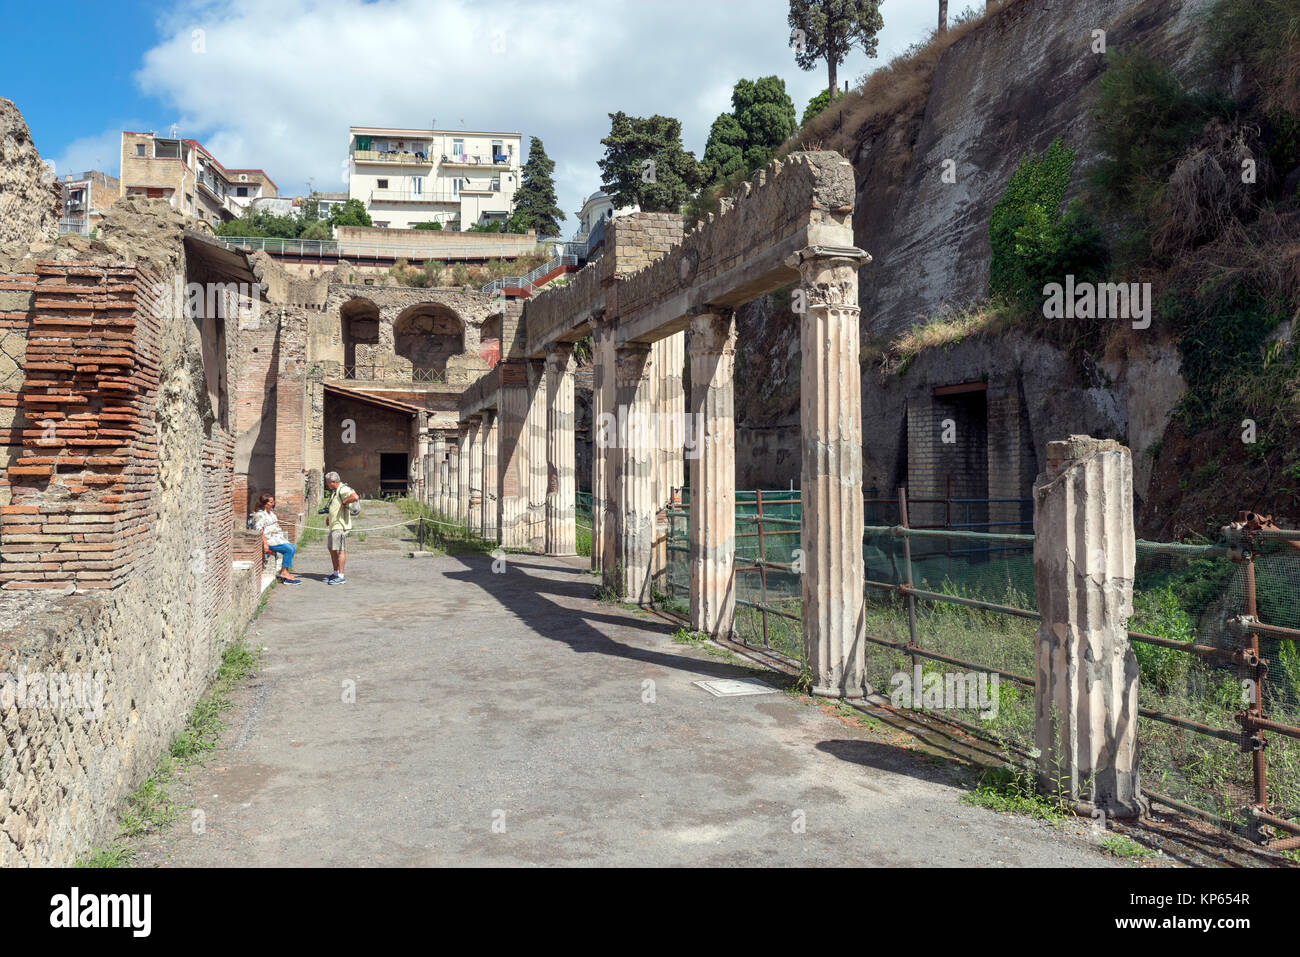 Tourists on a street in the Roman ruins at Herculaneum (Ercolano), Naples, Campania, Italy Stock Photo